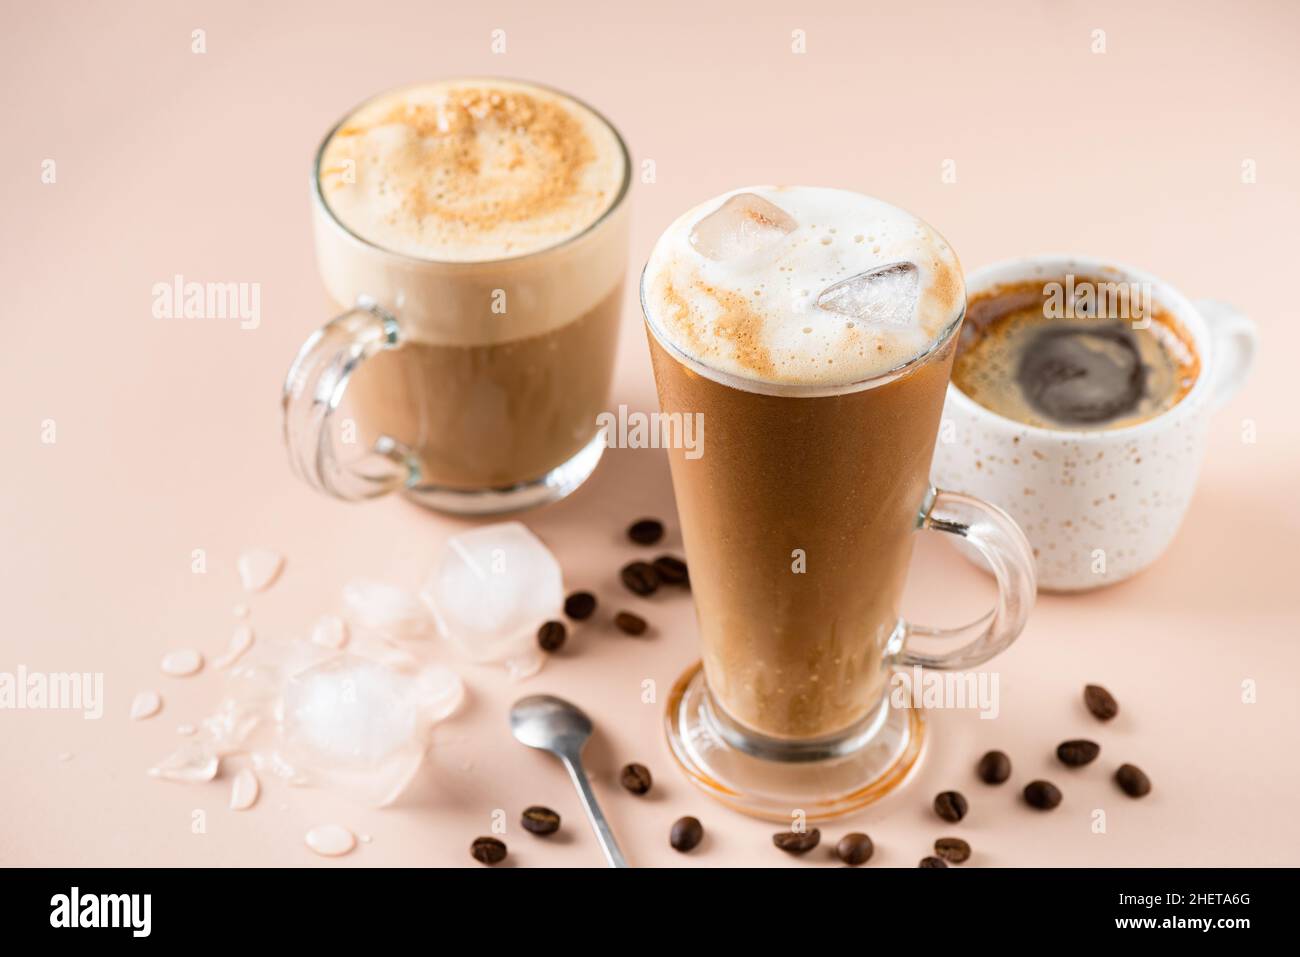 Ice coffee latte in glass cup, espresso cup and cappuccino. Various coffee drinks Stock Photo